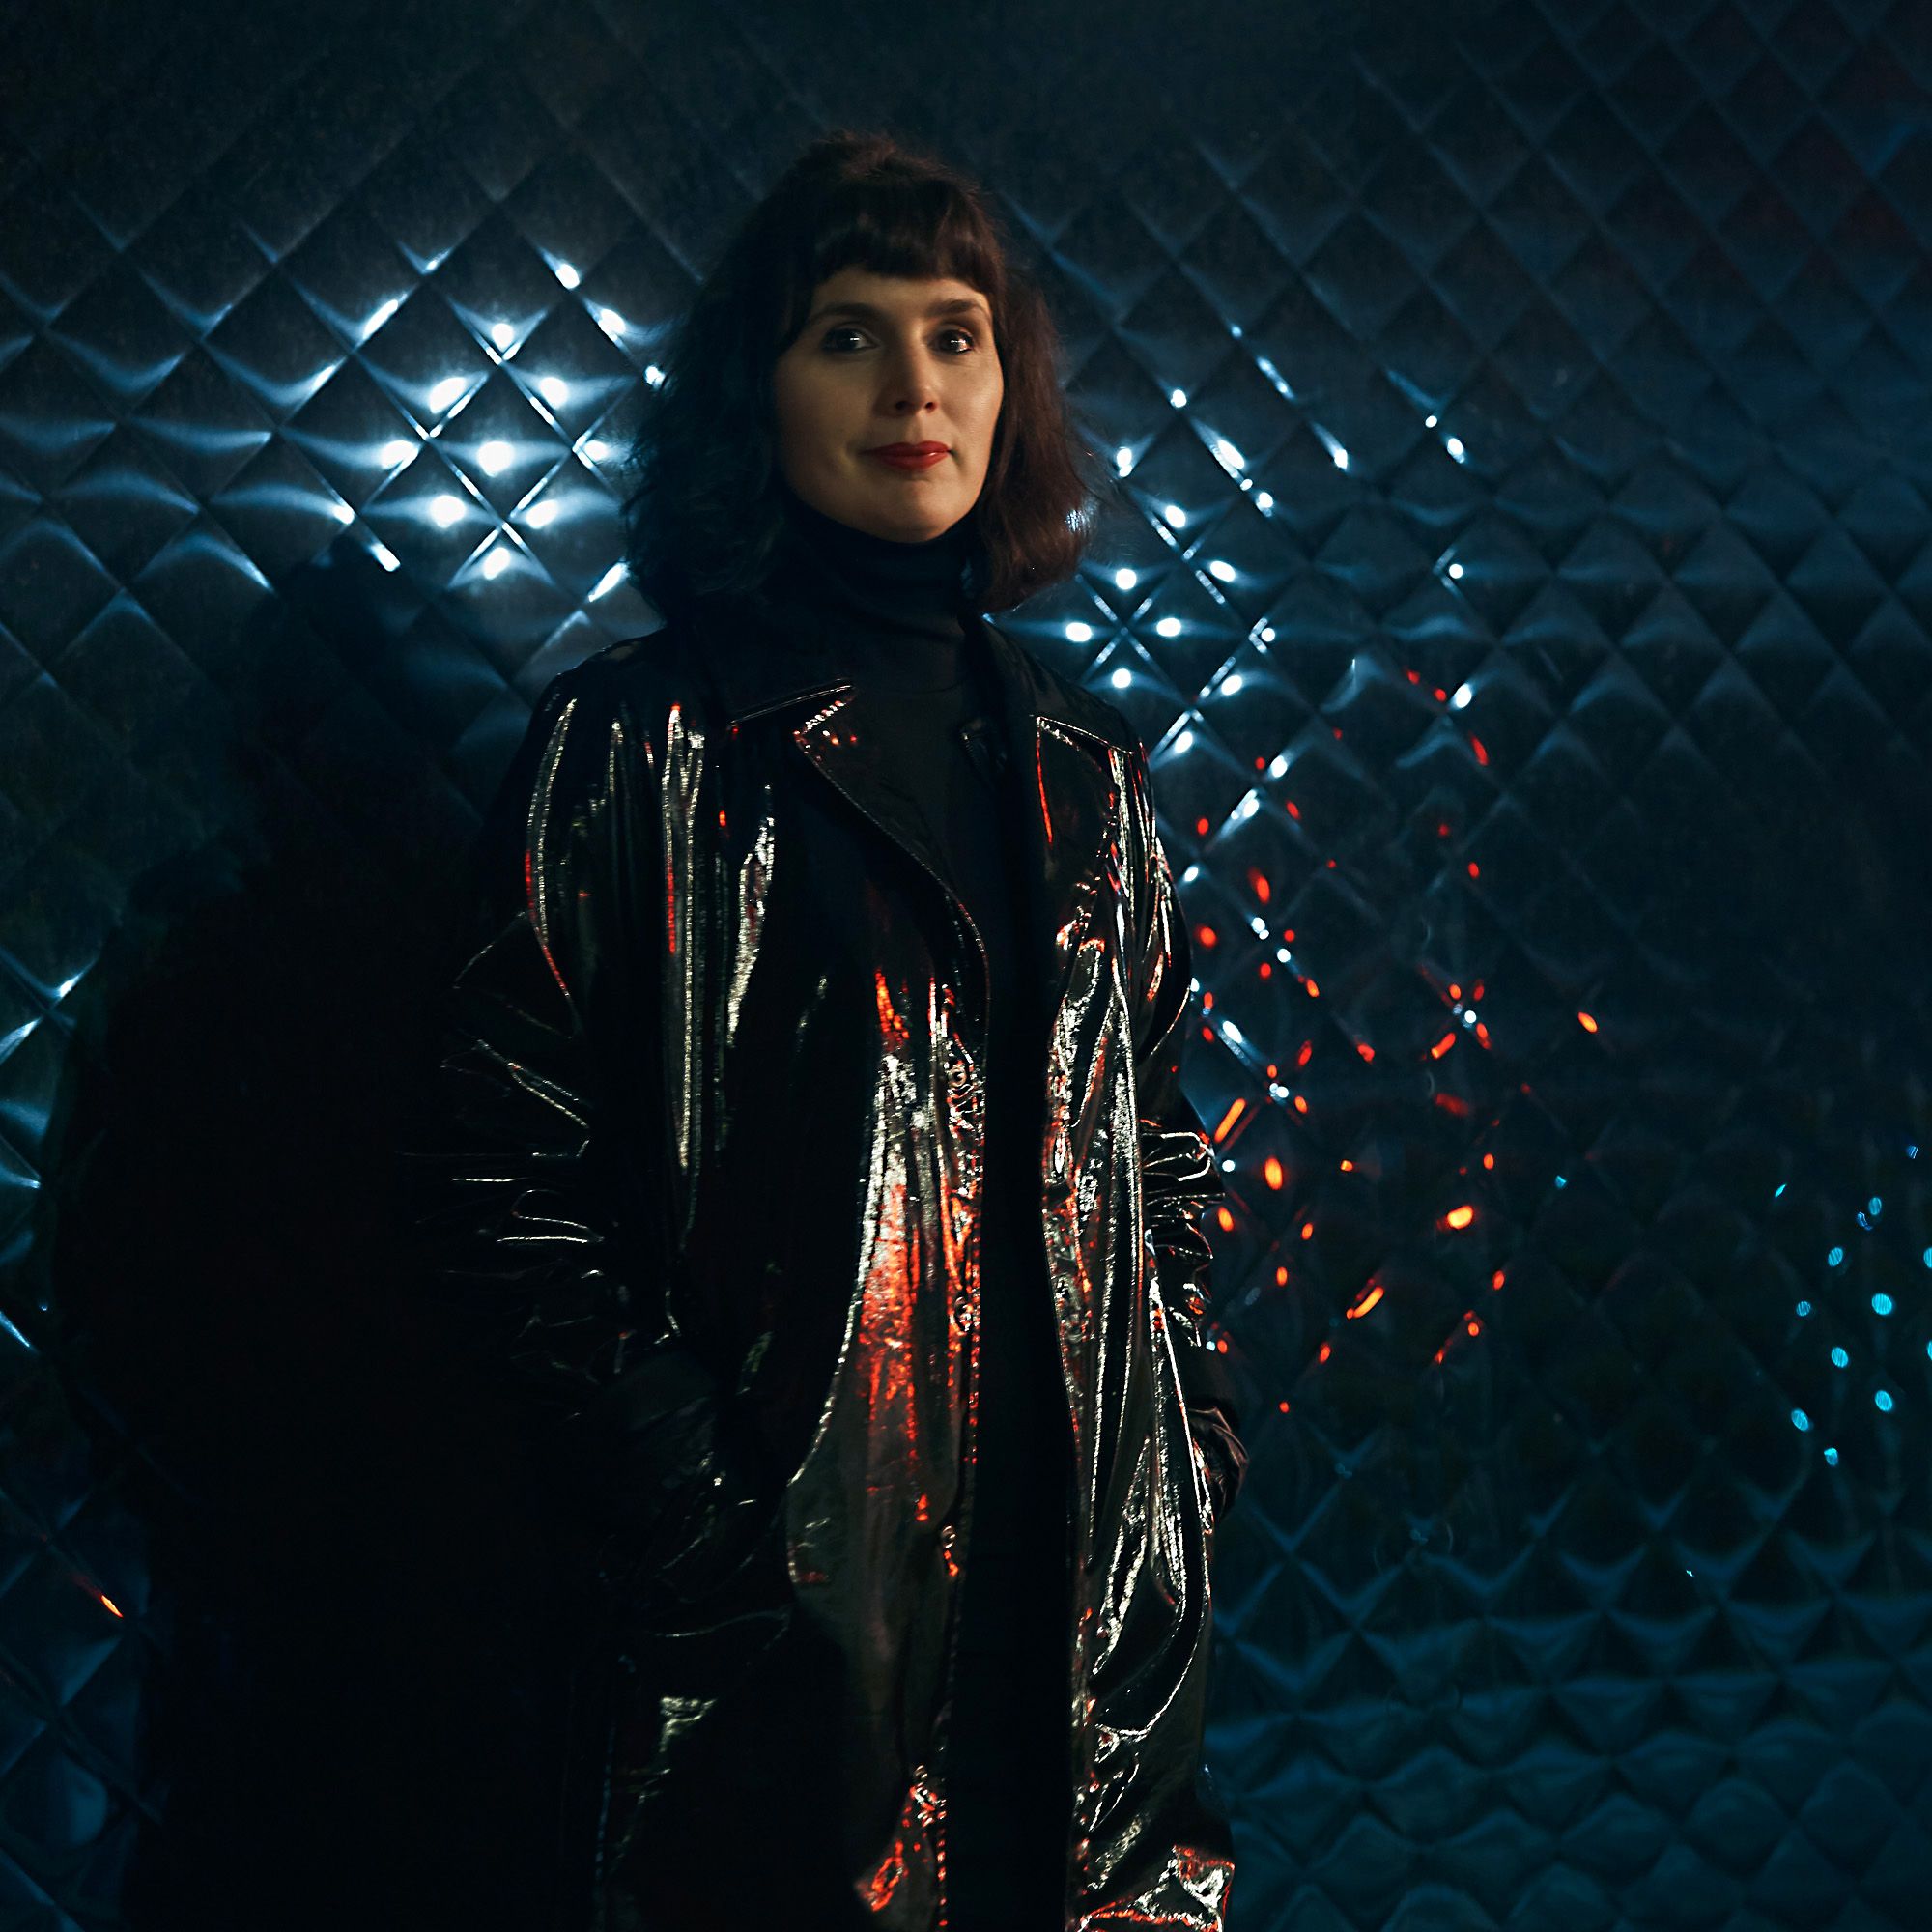 photo of a women with black hair standing in a shiny black nylon coat against a black leather wall